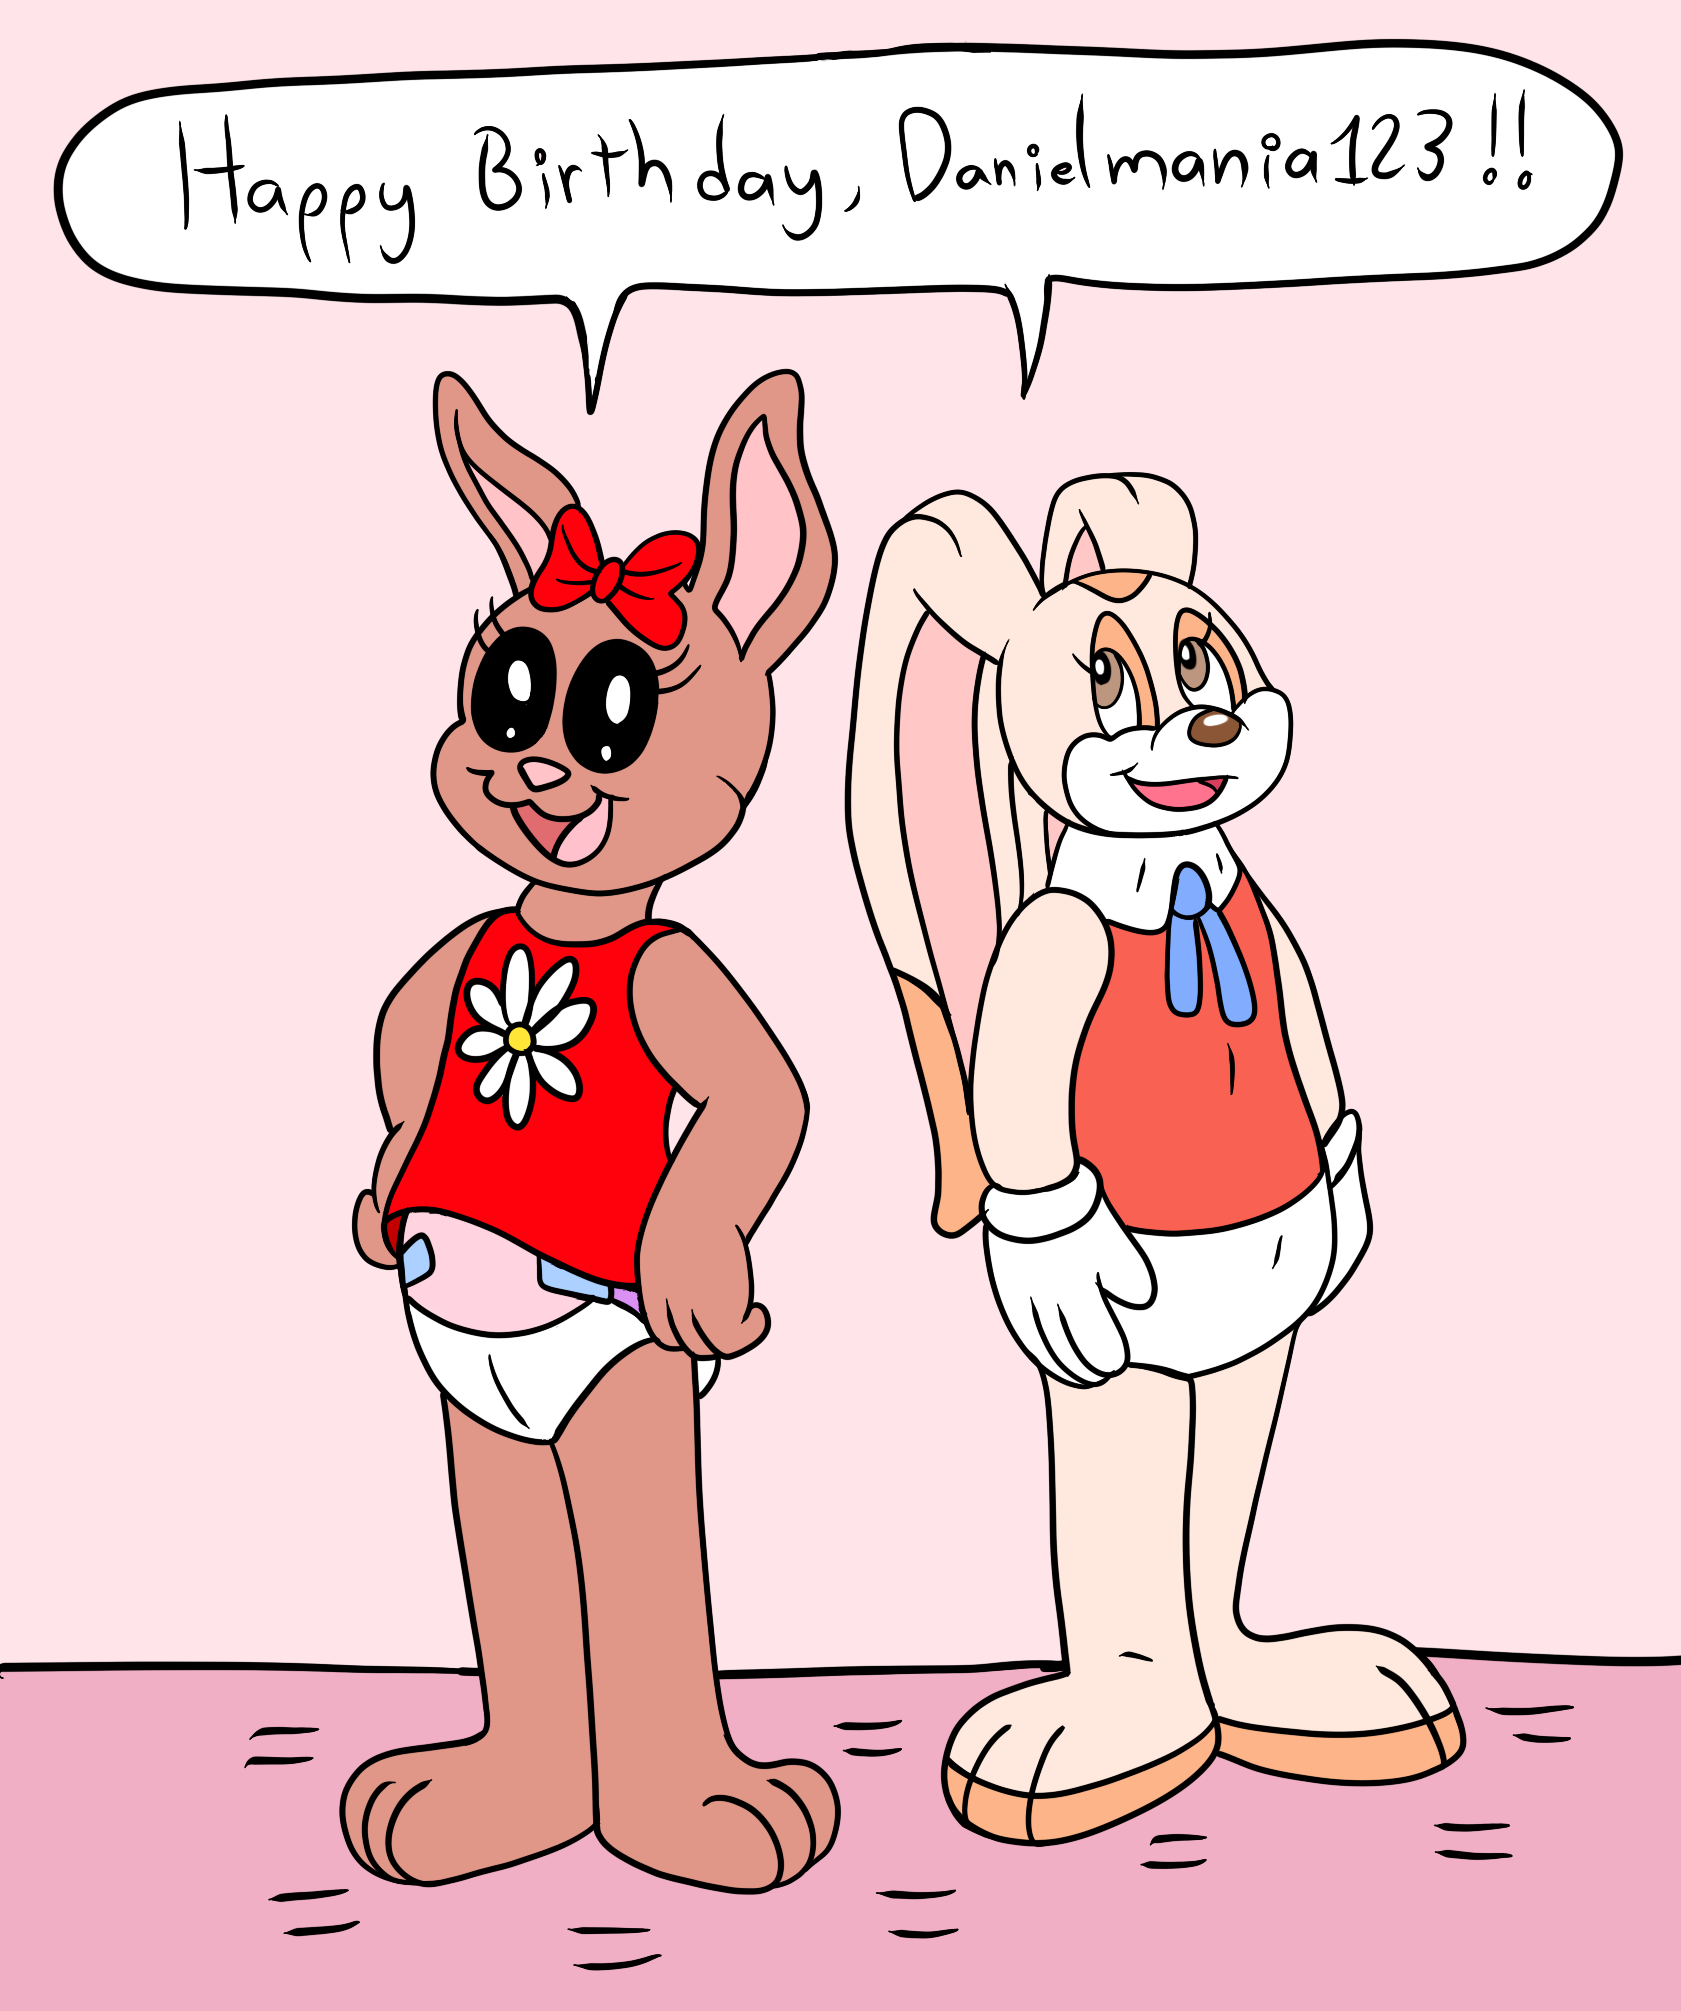 Nightmare and Dream birthday by Galaxybunny11 on DeviantArt